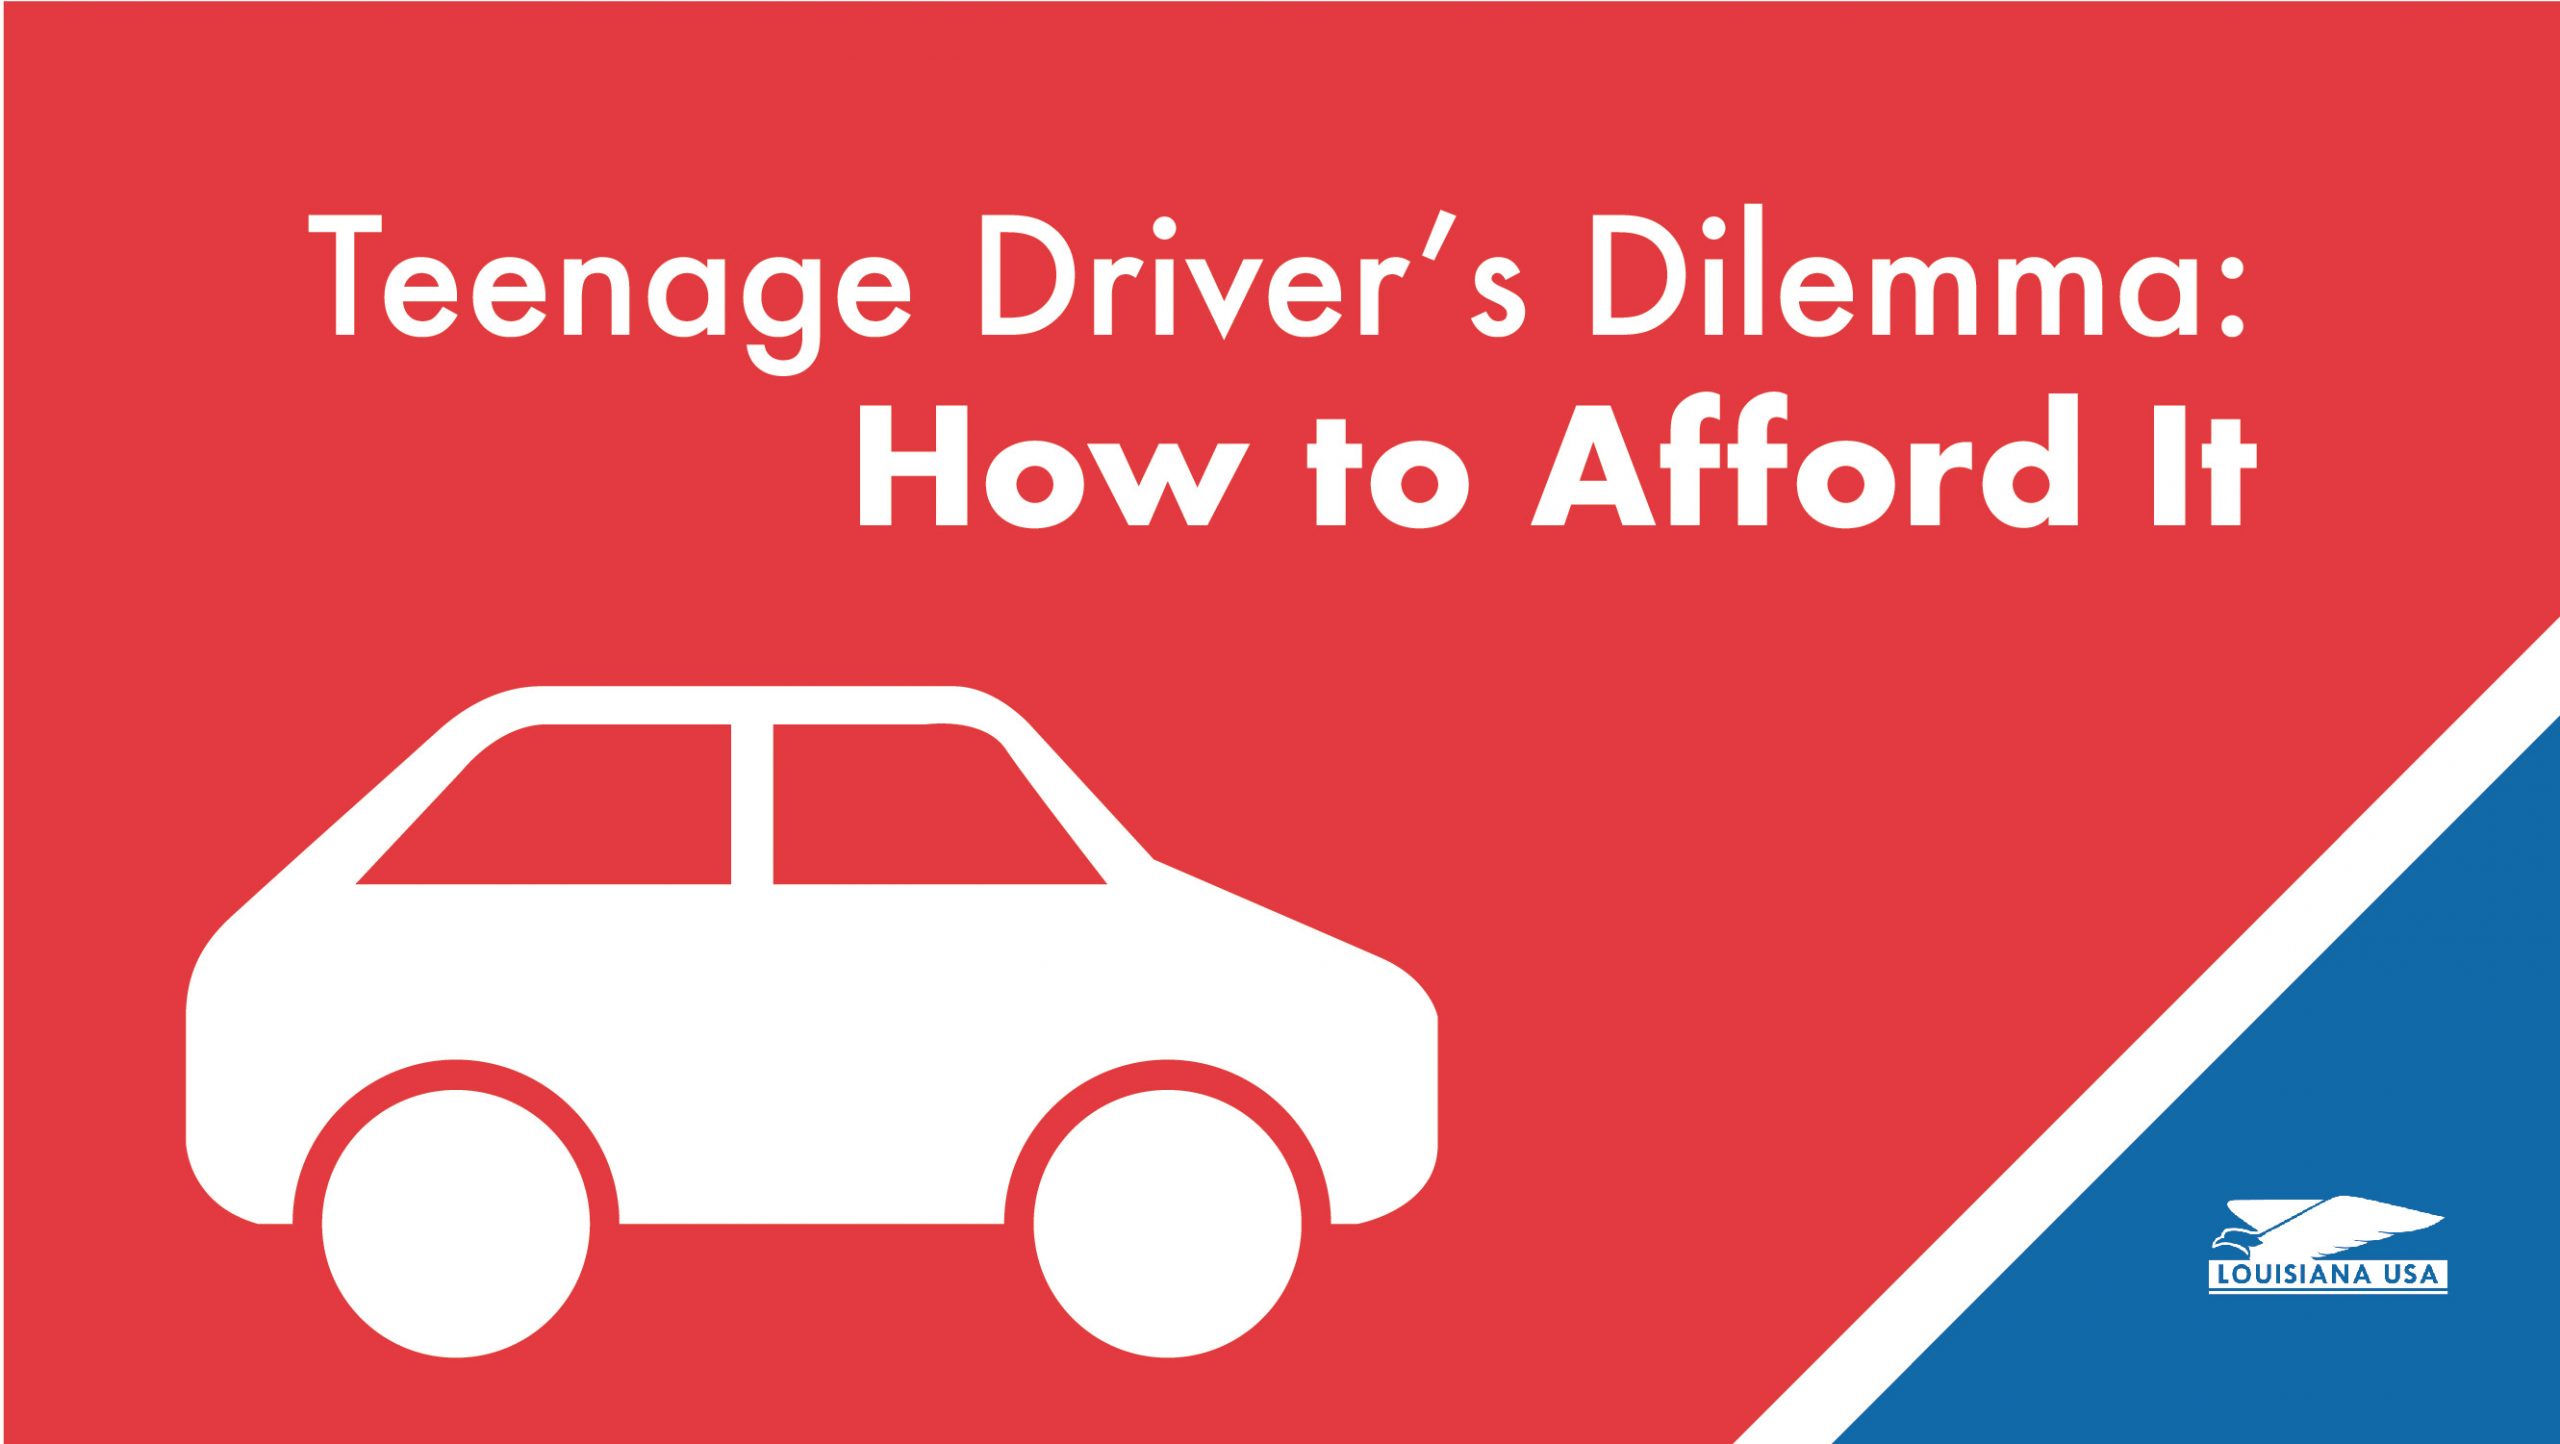 Teenage Driver’s Dilemma: How To Afford It